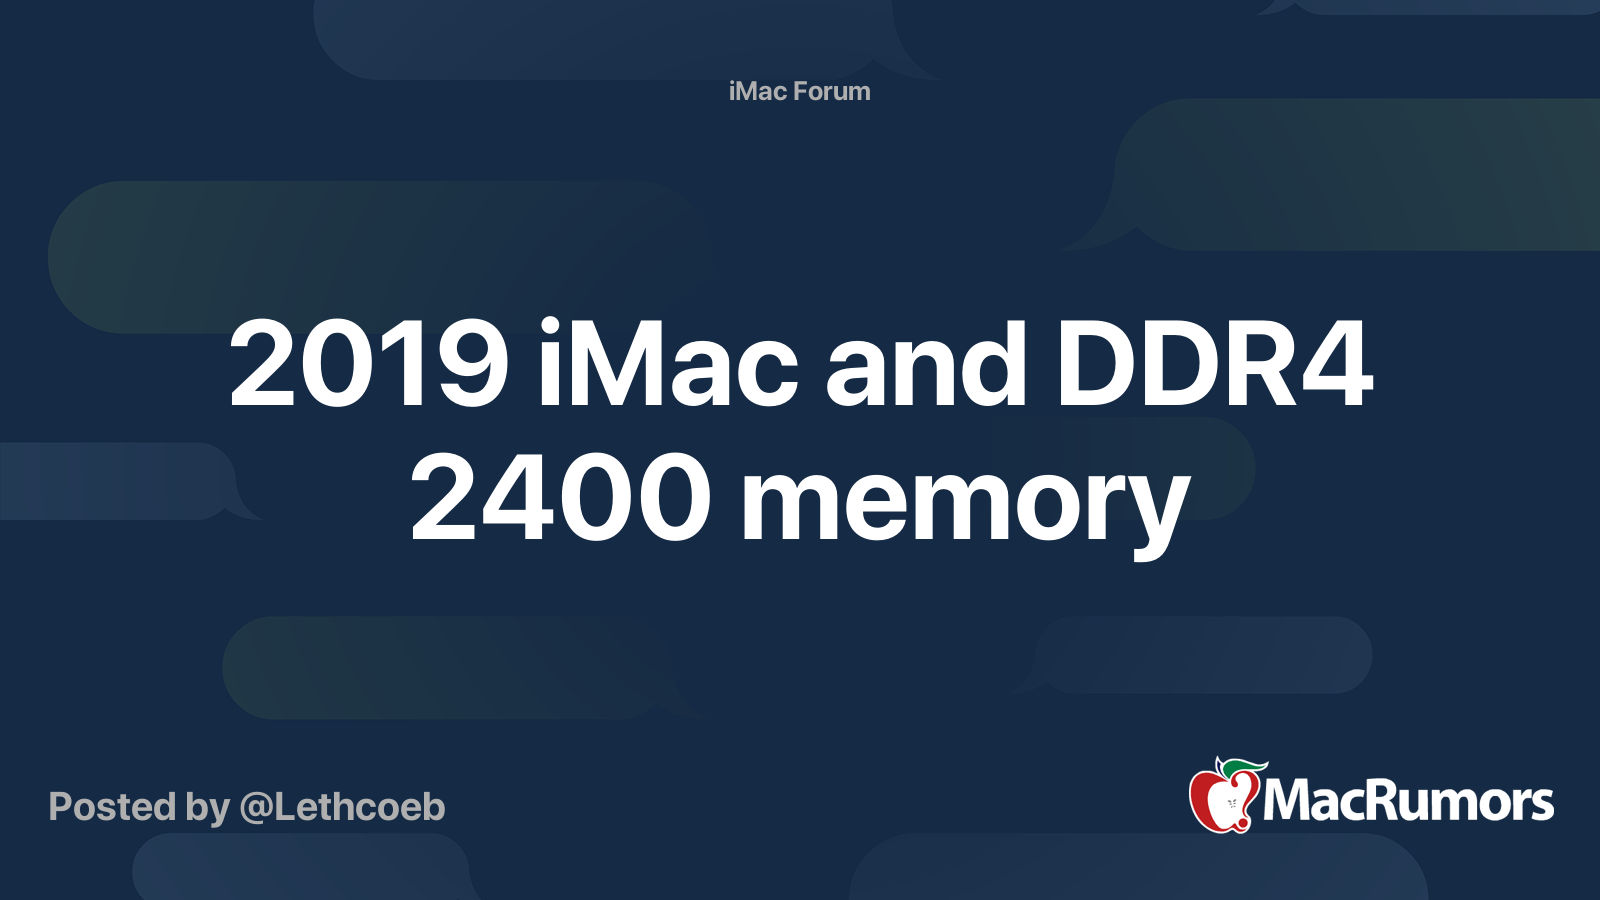 and DDR4 2400 memory | MacRumors Forums